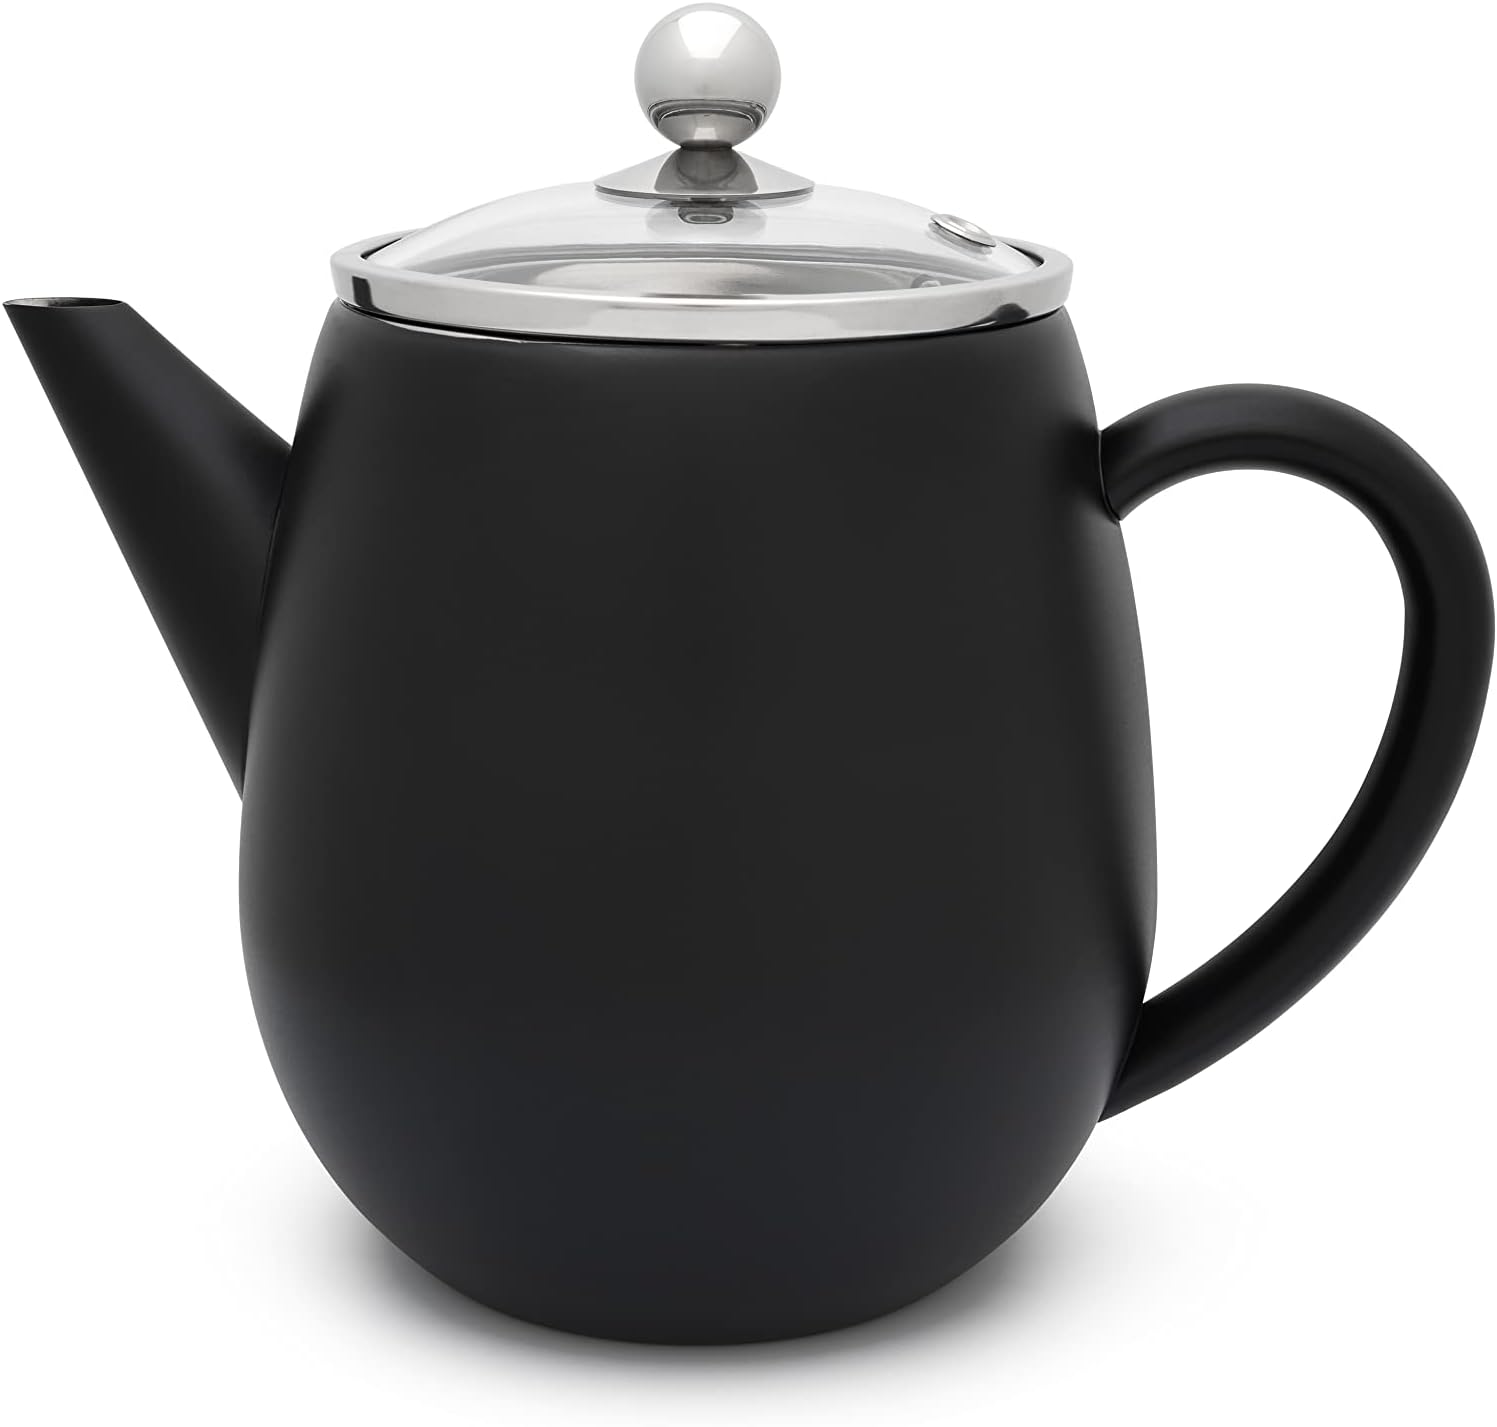 Small Black Double-Walled Stainless Steel Teapot 1.1 Litres with Filter Strainer for Preparation of Loose Tea